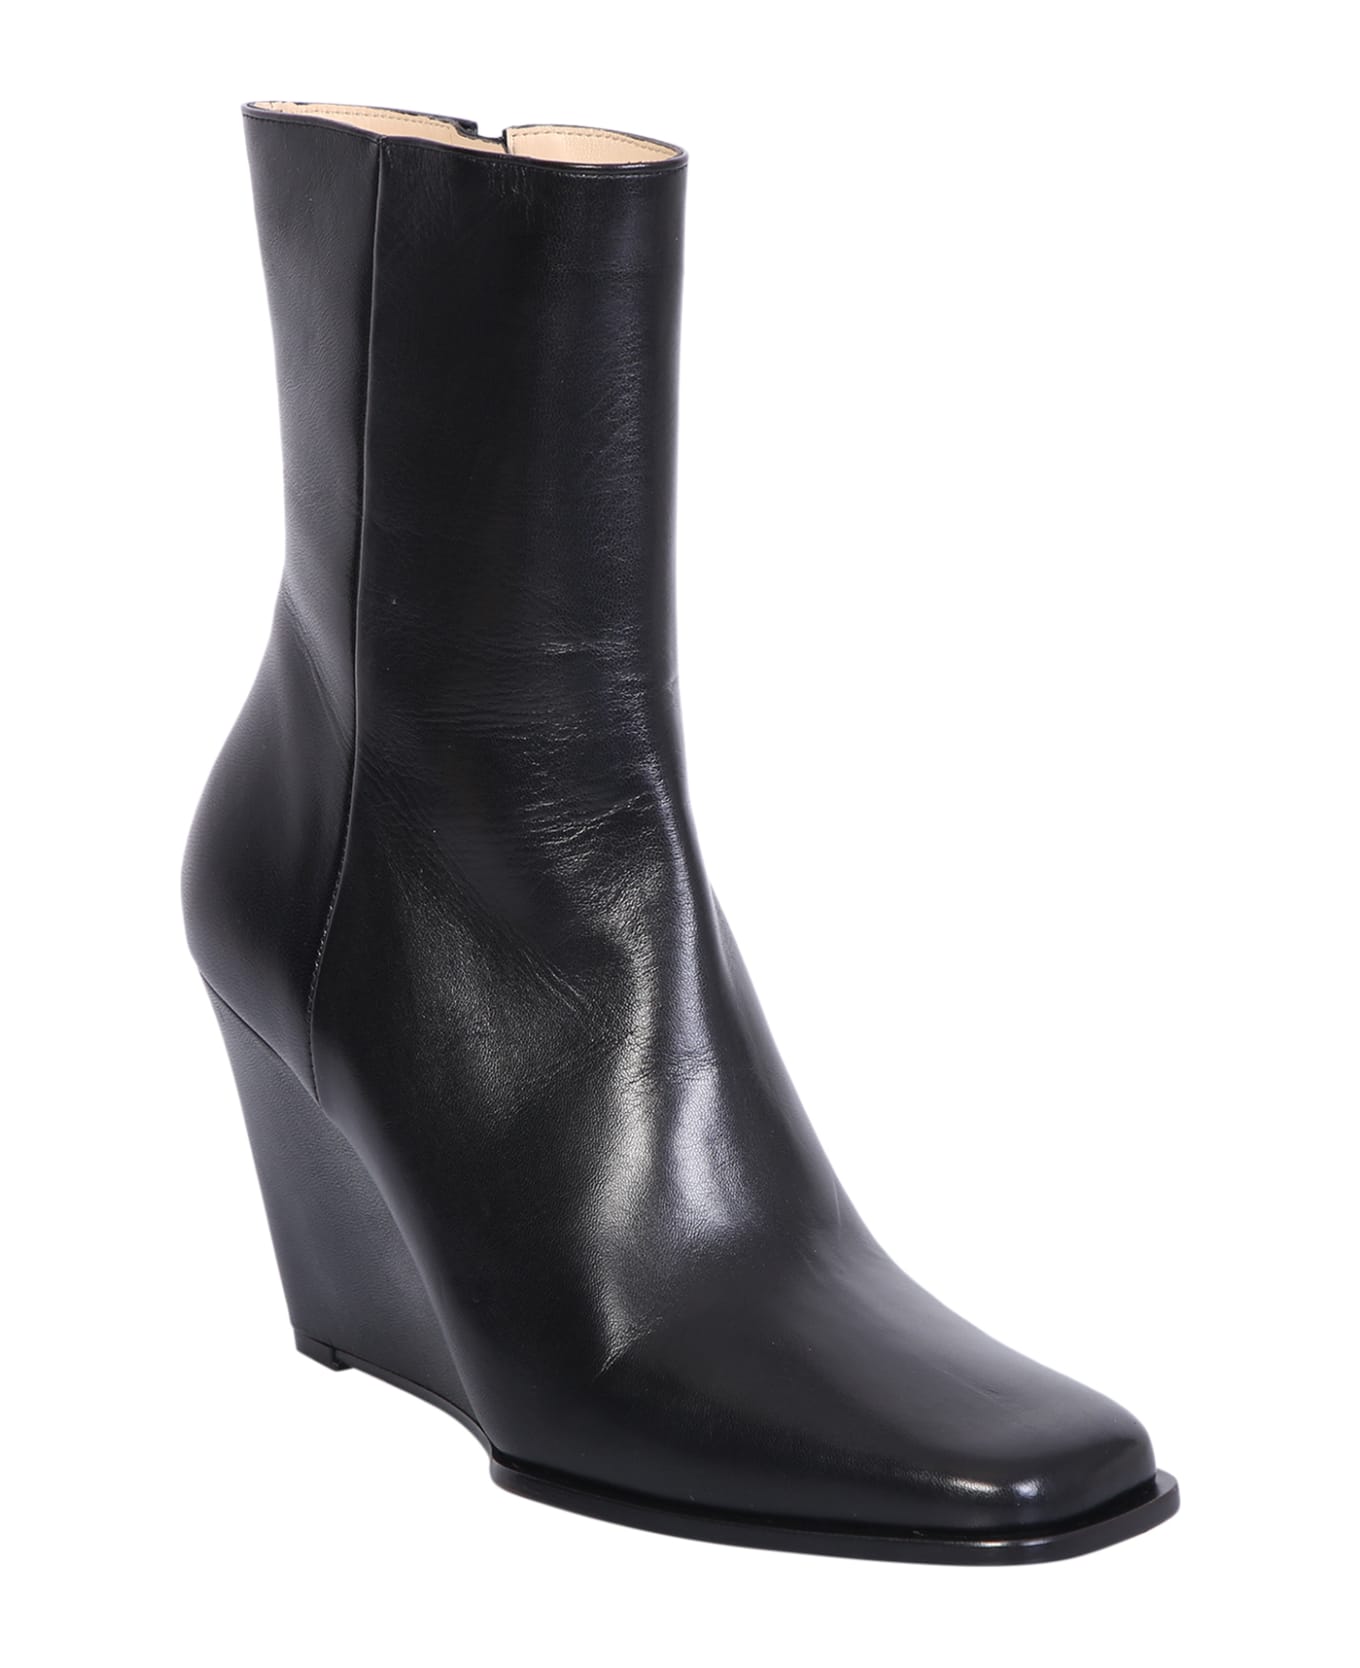 Wandler Gaia Ankle Boots - Black